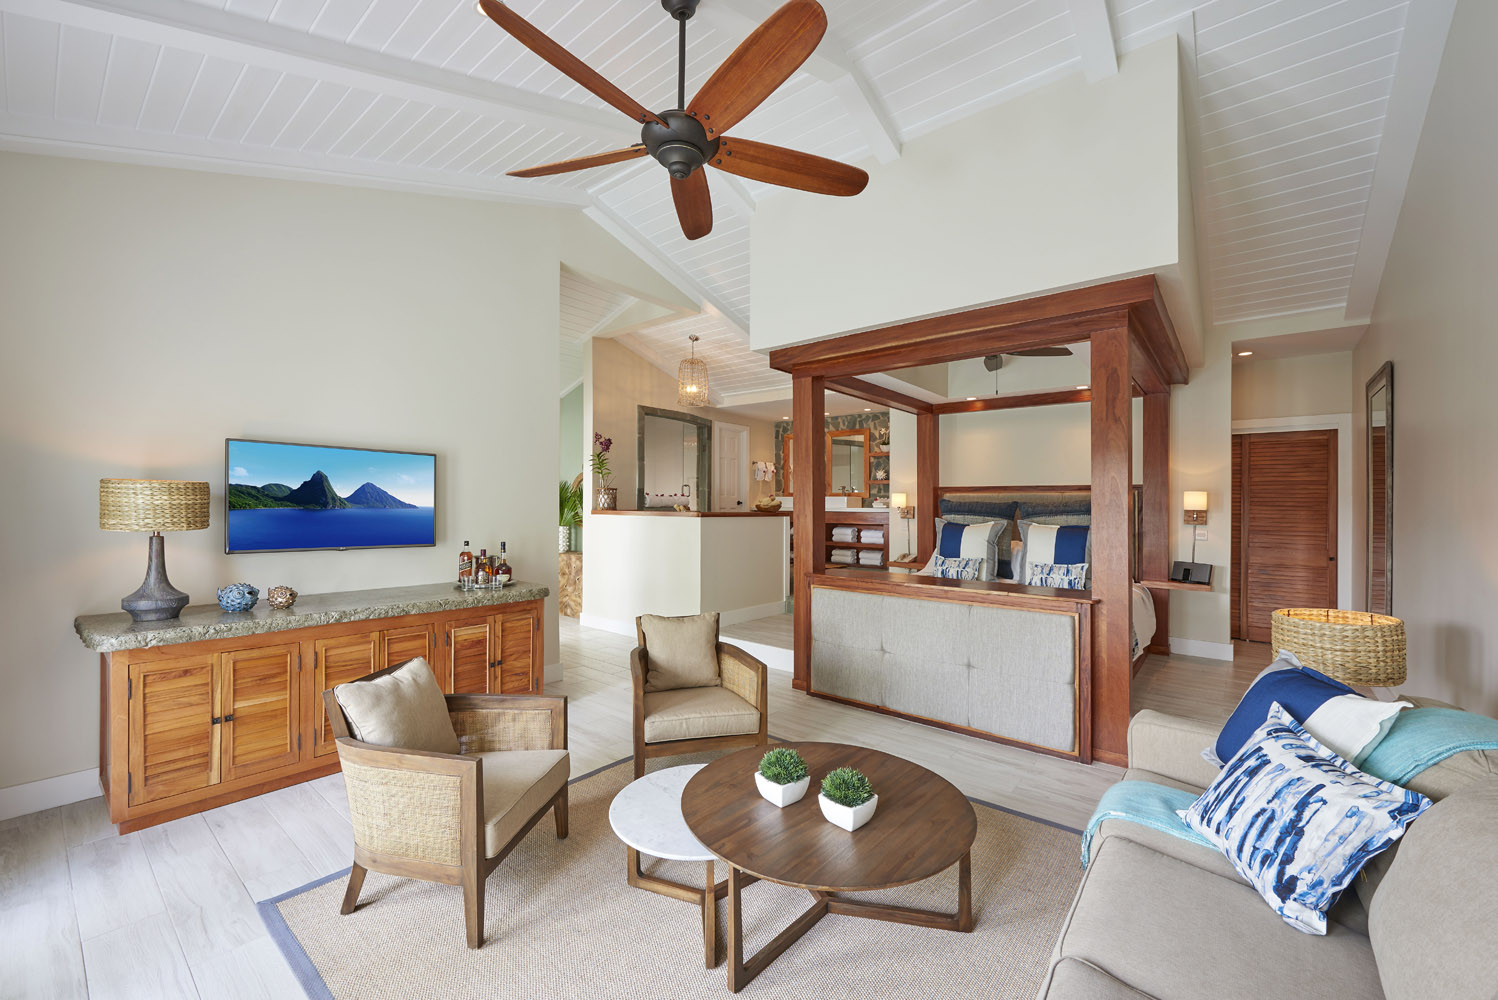 Spacious adults-only suites designed for privacy offer the best of indoor and outdoor luxury and butler service, that special amenity for the ultimate personalized getaway at Serenity at Coconut Bay.